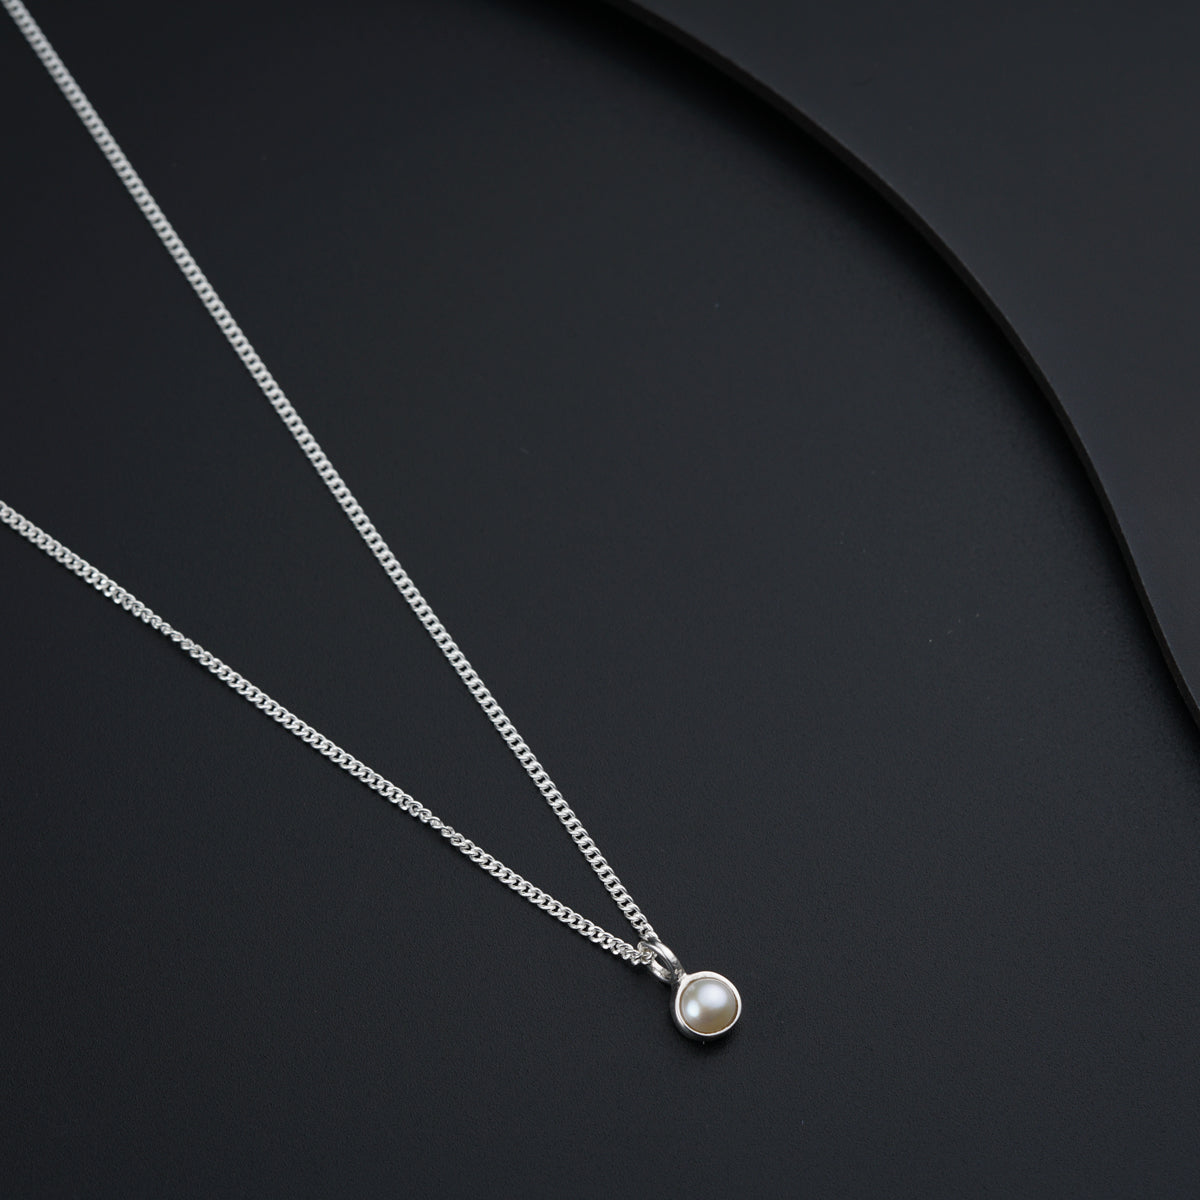 Silver Necklace with Pearl Drop